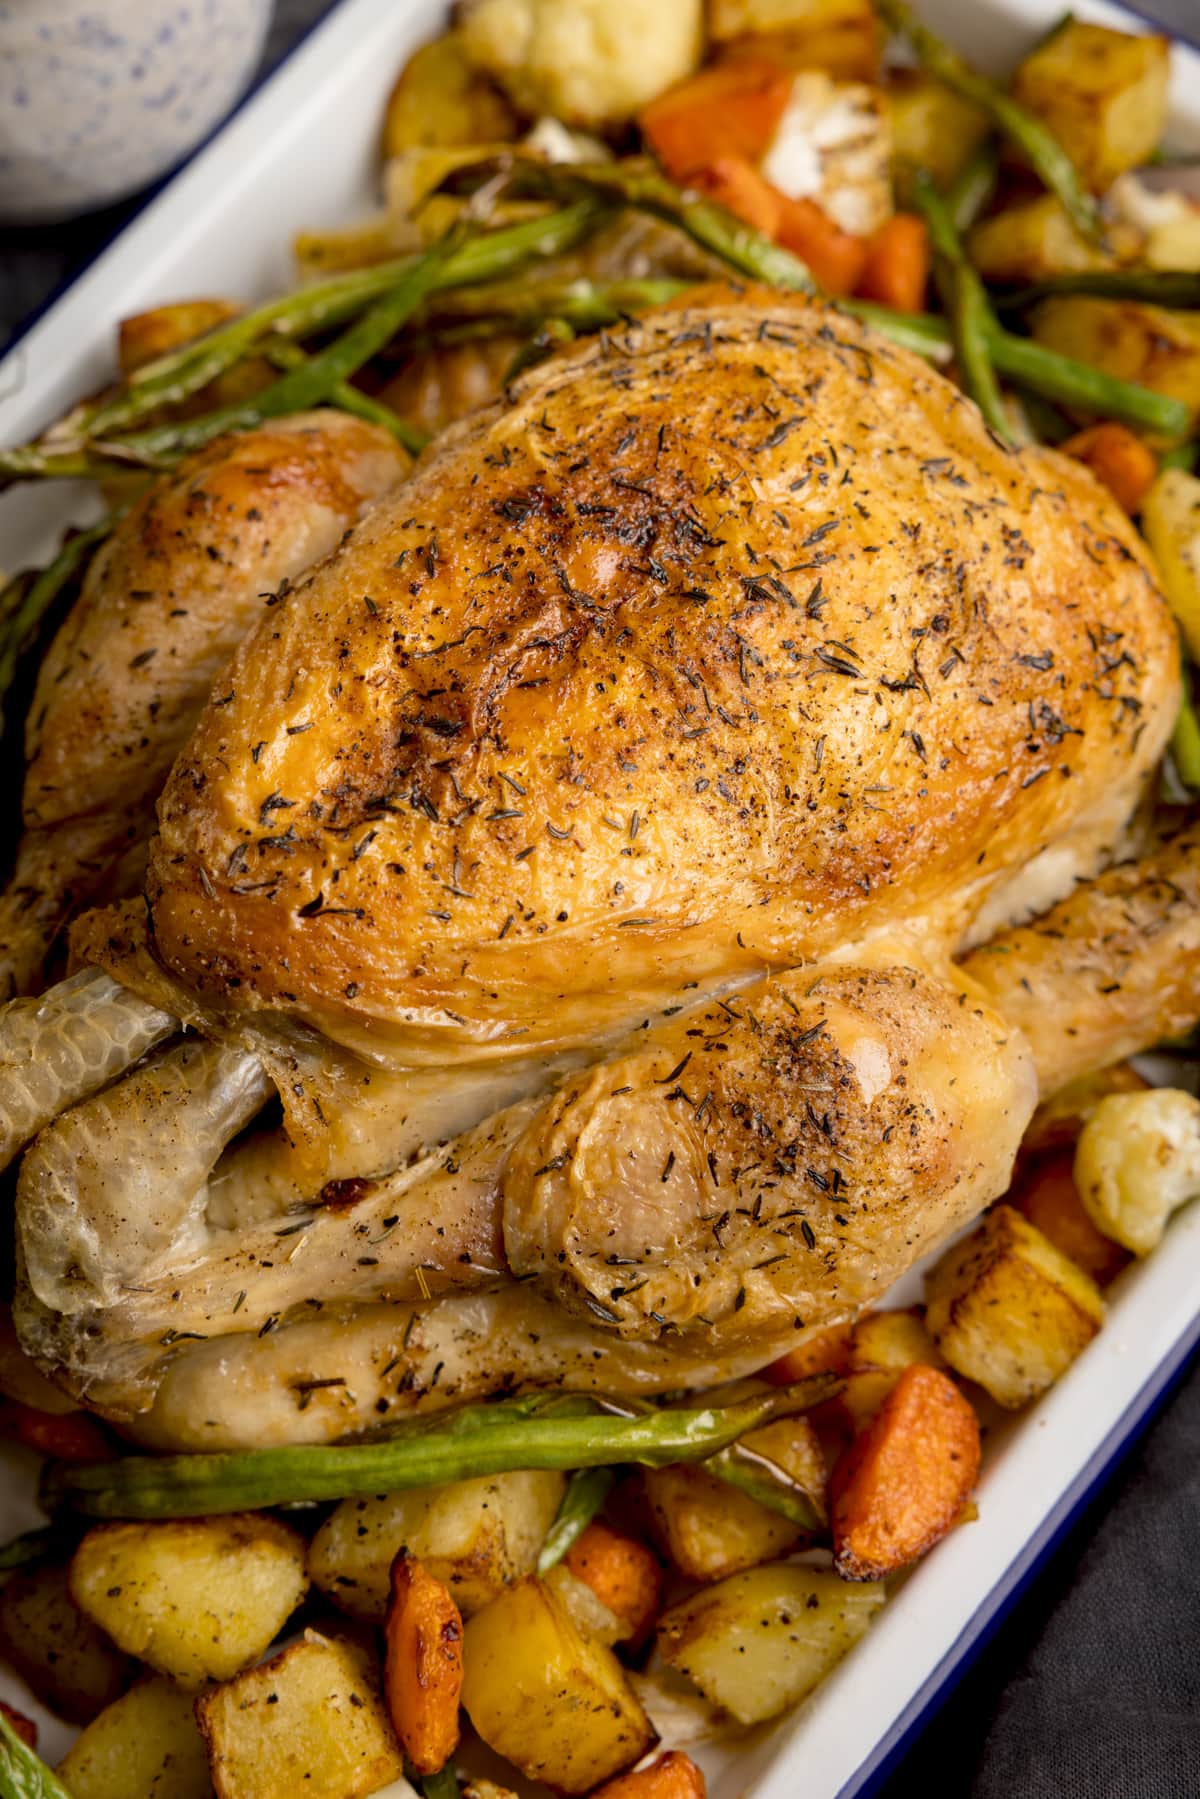 A white roasting dish filled with Air Fryer Roast Chicken Dinner, a roast chicken in the middle with potatoes, carrots and beans surrounding it. a small dark bowl filled with rock salt is next to the dish and a dark blue napkin is on the side, set on a dark grey background.